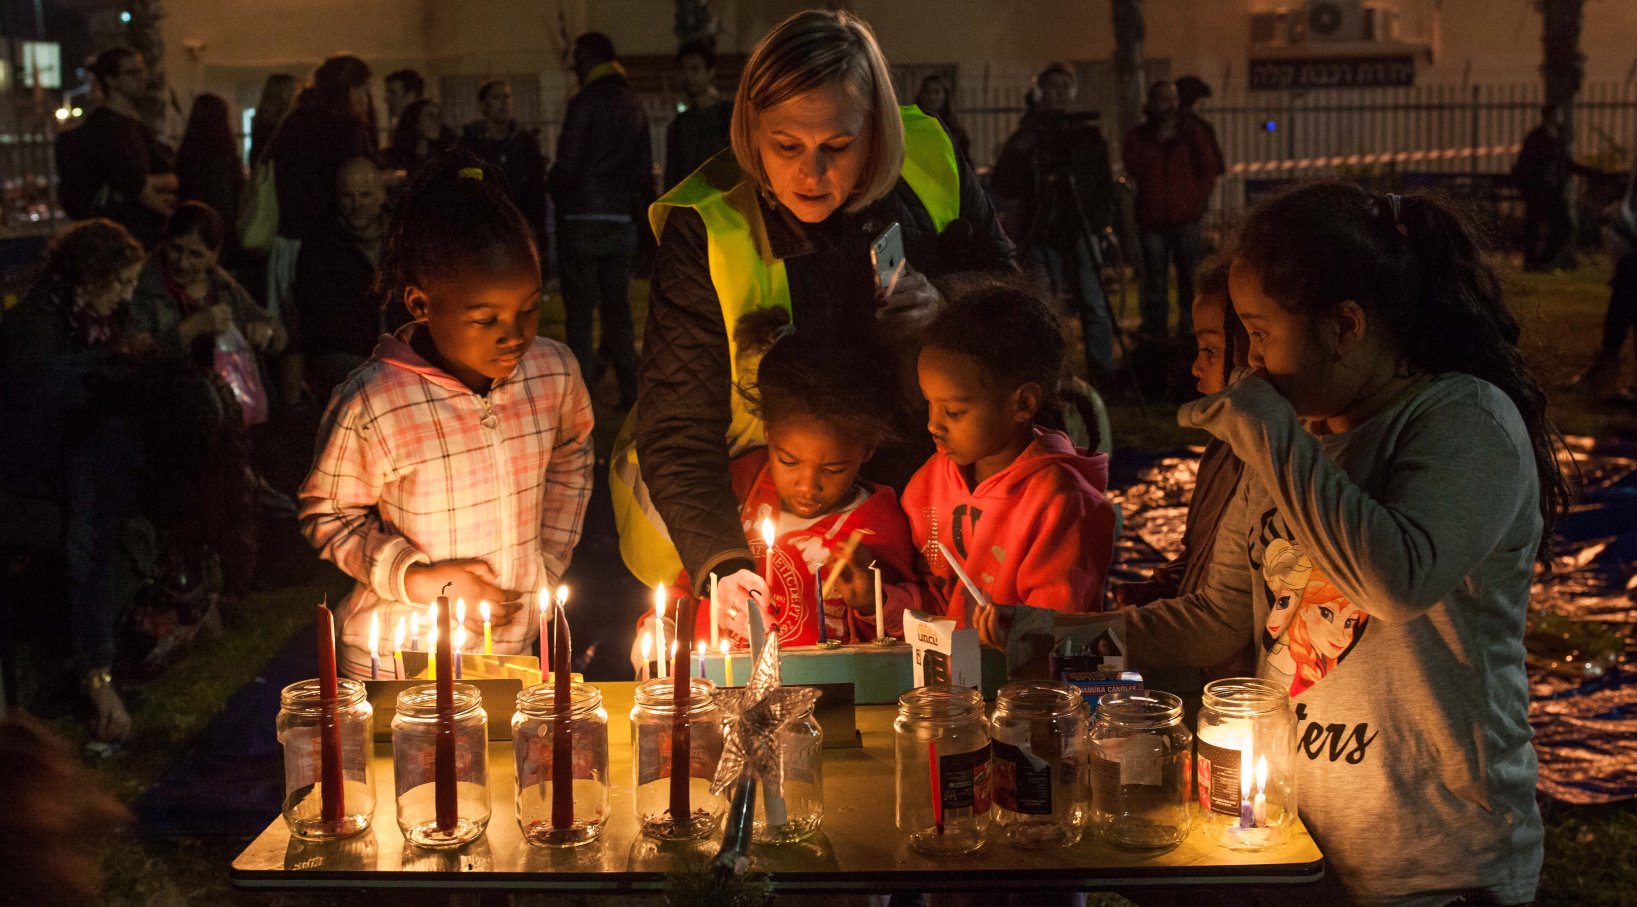 Children light candles for the fourth night of Hanukkah, December 9,2015. Photo by Esther Rubyan/FLASH90